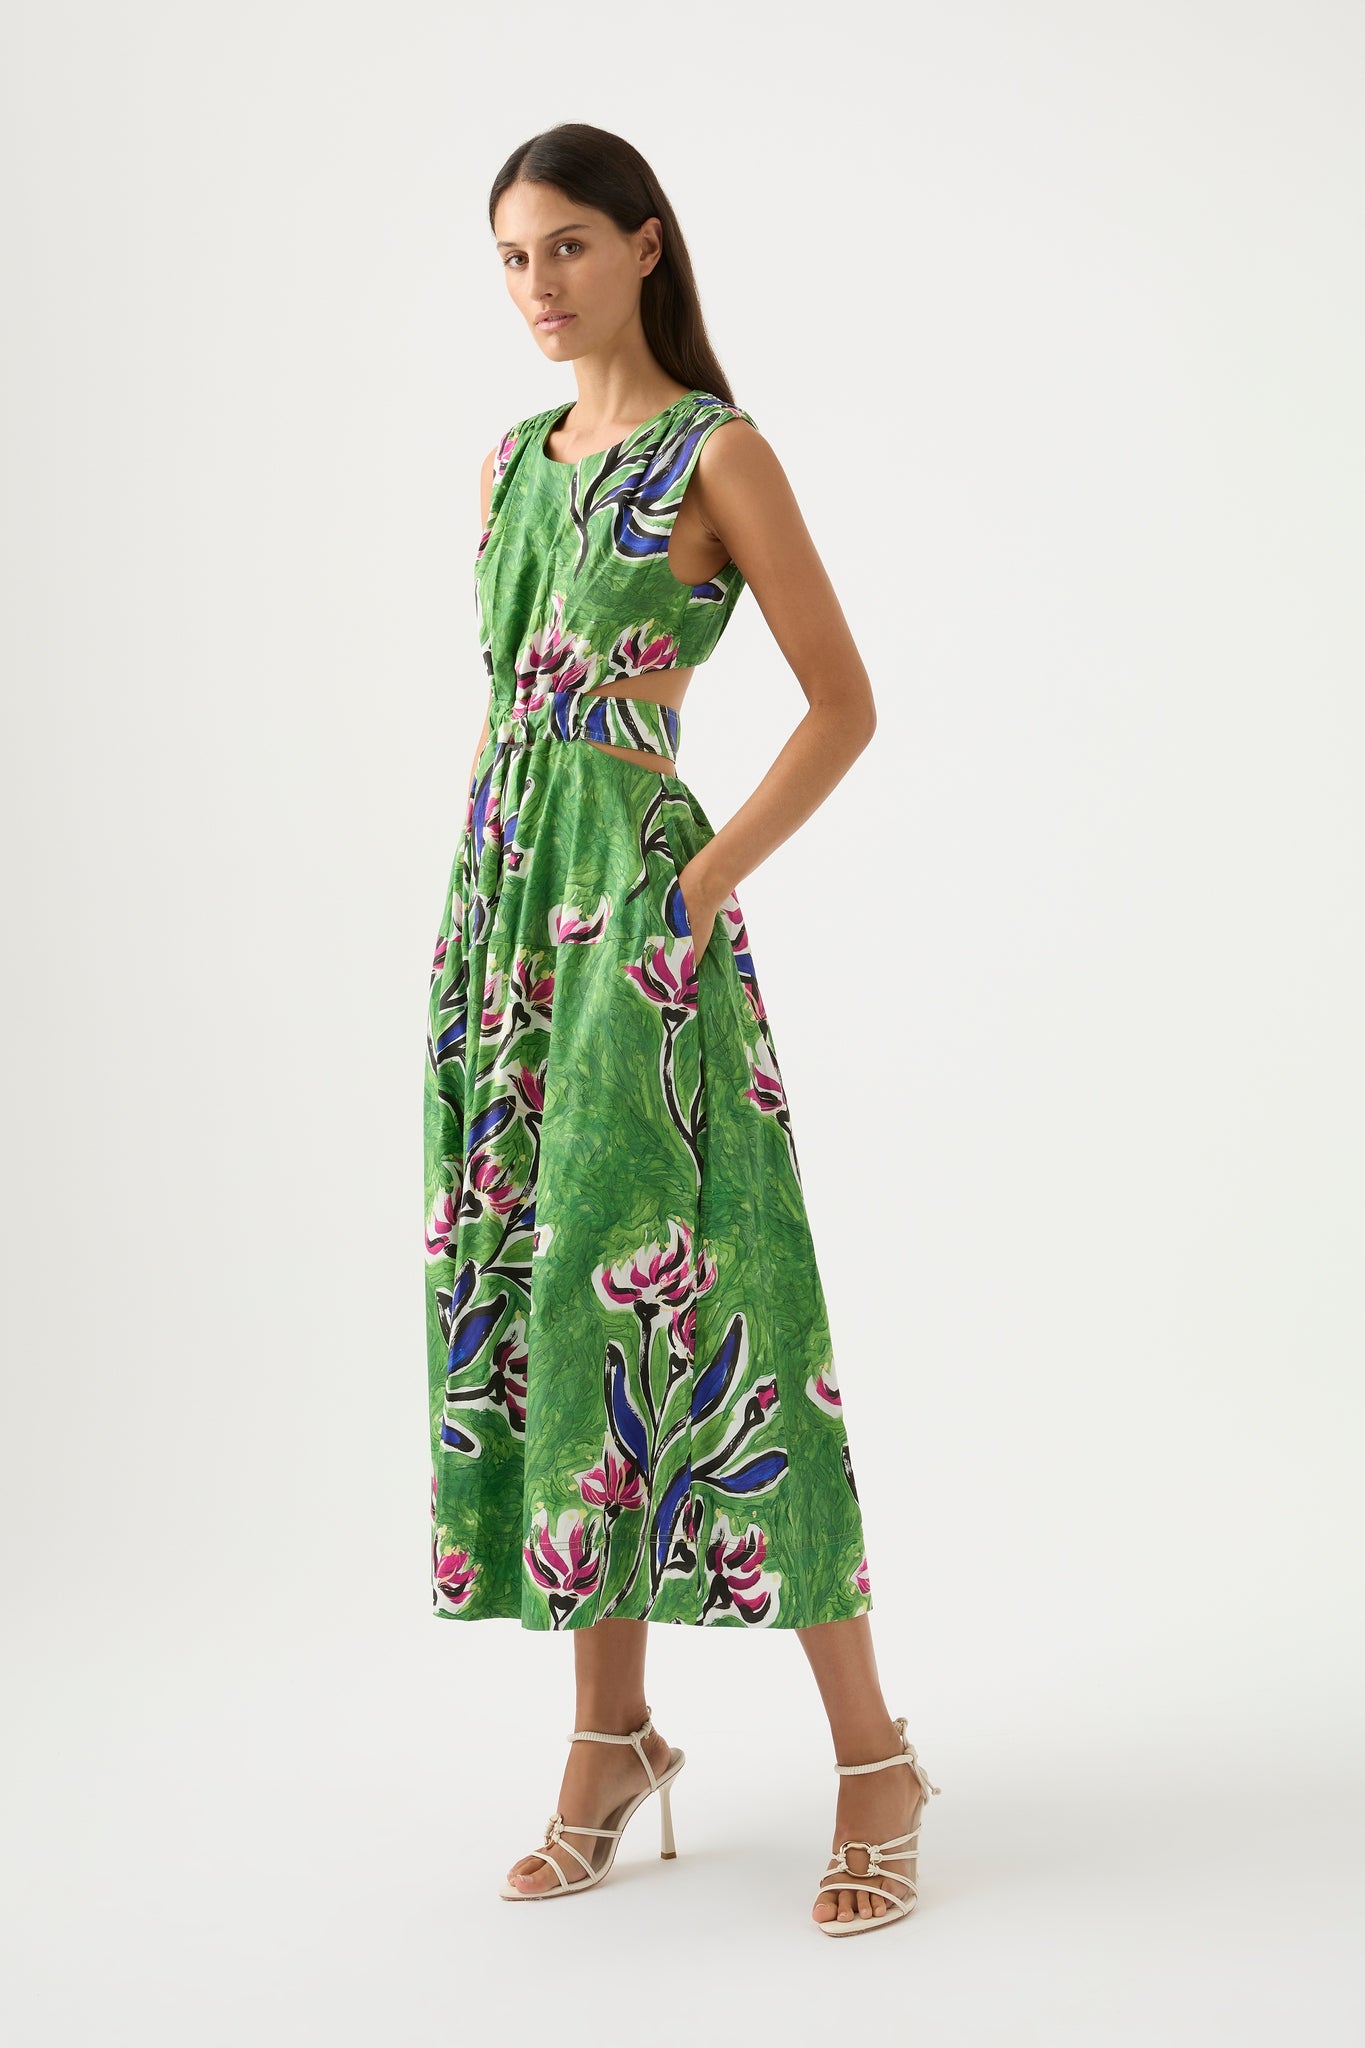 Flounce London Printed & Floral Dresses sale - discounted price